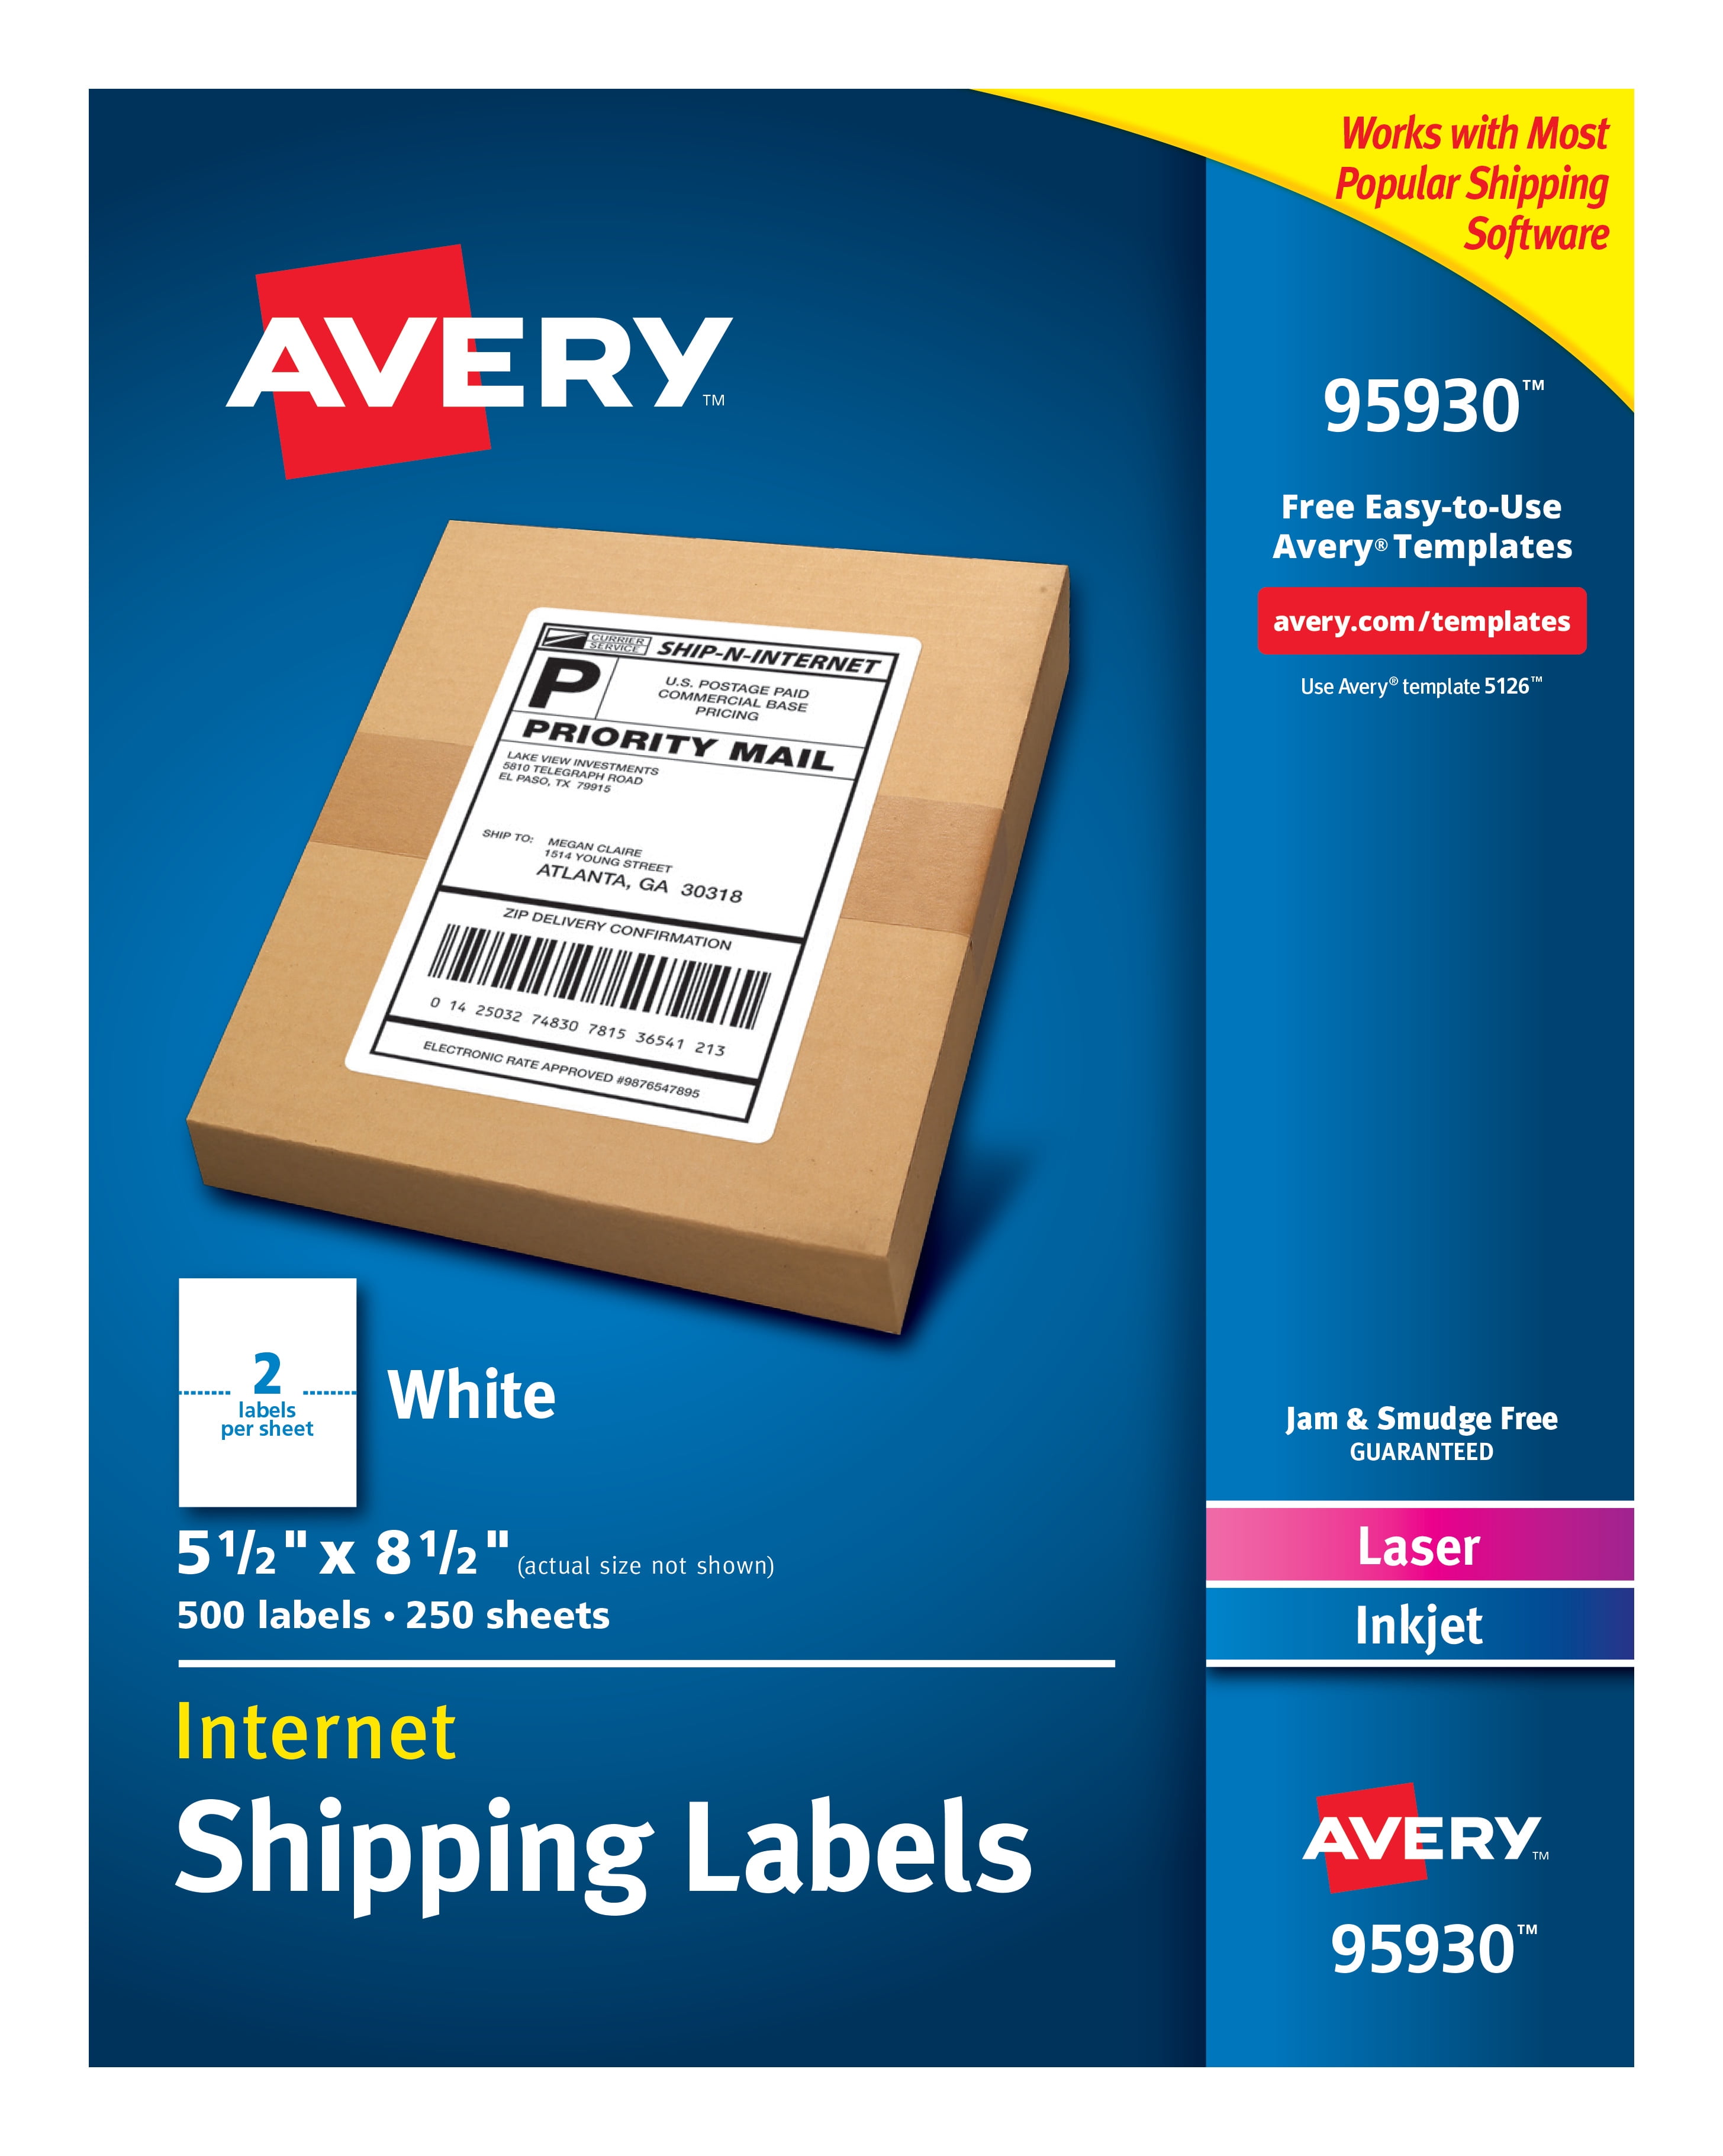 Inventory Control and Handling Adhesive 500 Permanent Adhesive Labels Per Roll Made in The USA and Fully Biodegradable 1 OK to Ship Labels 500 3 X 2 OK to Ship Stickers 